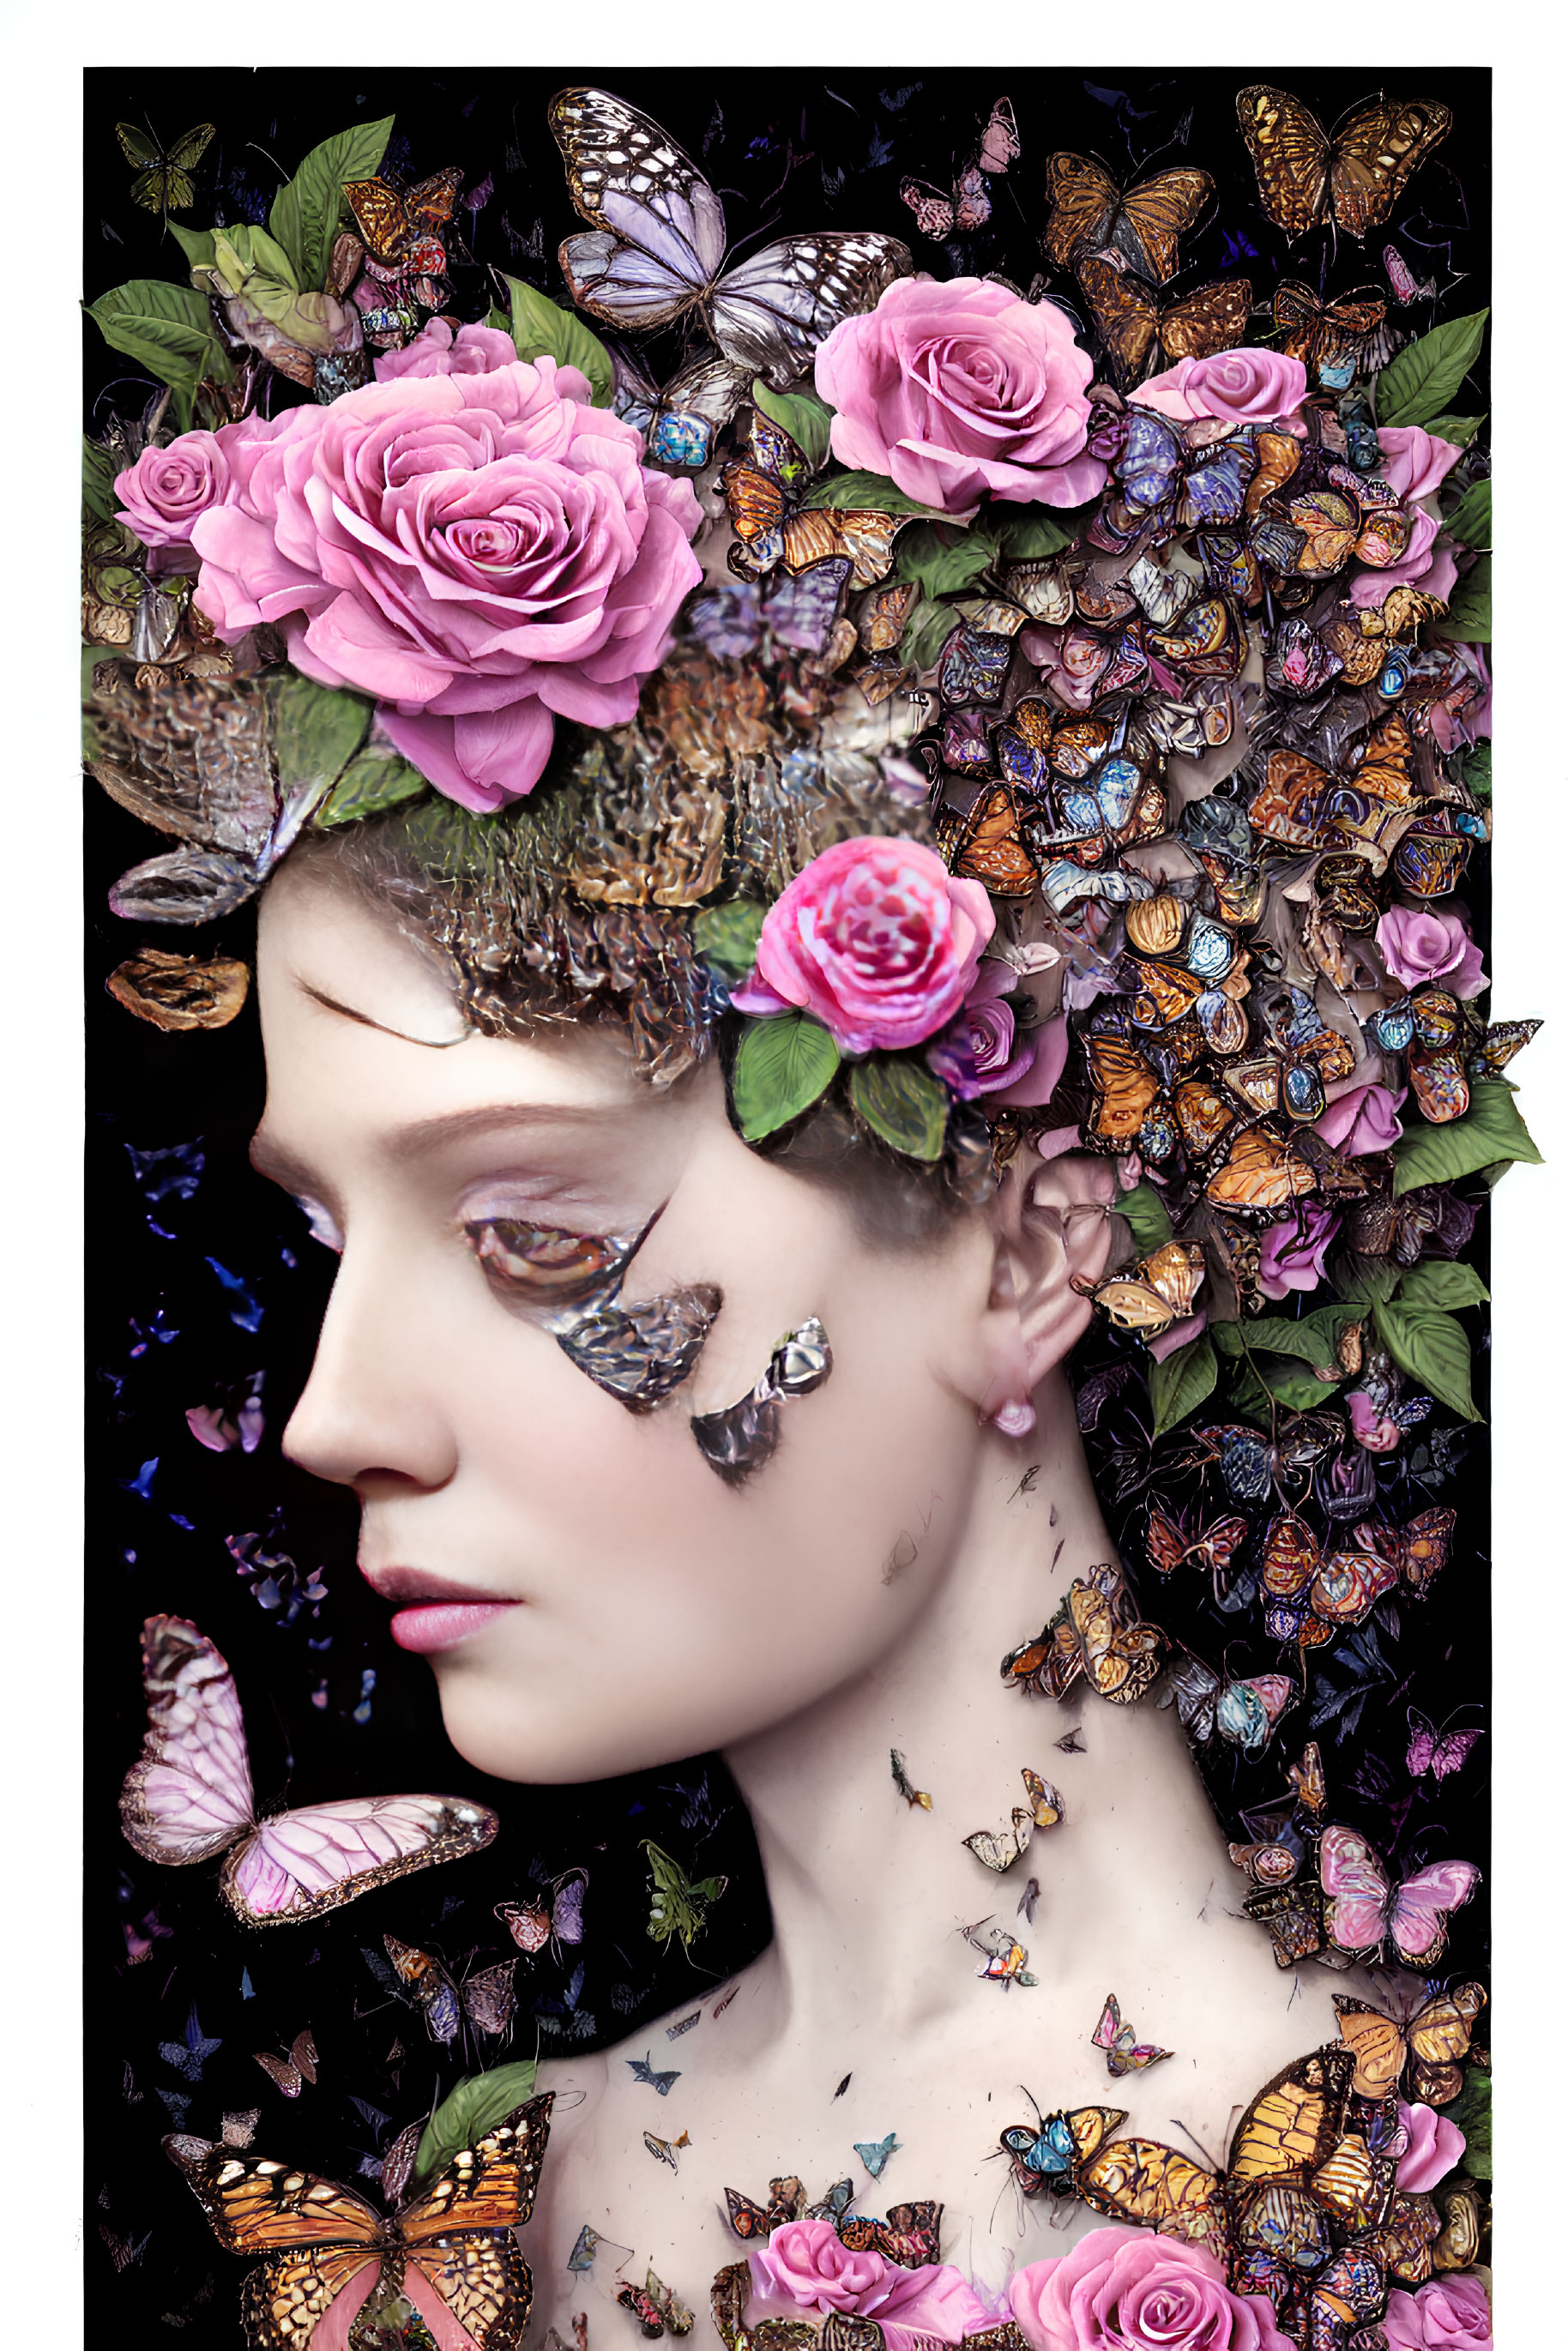 Surreal portrait of woman with pink roses and butterflies for a dreamlike vibe